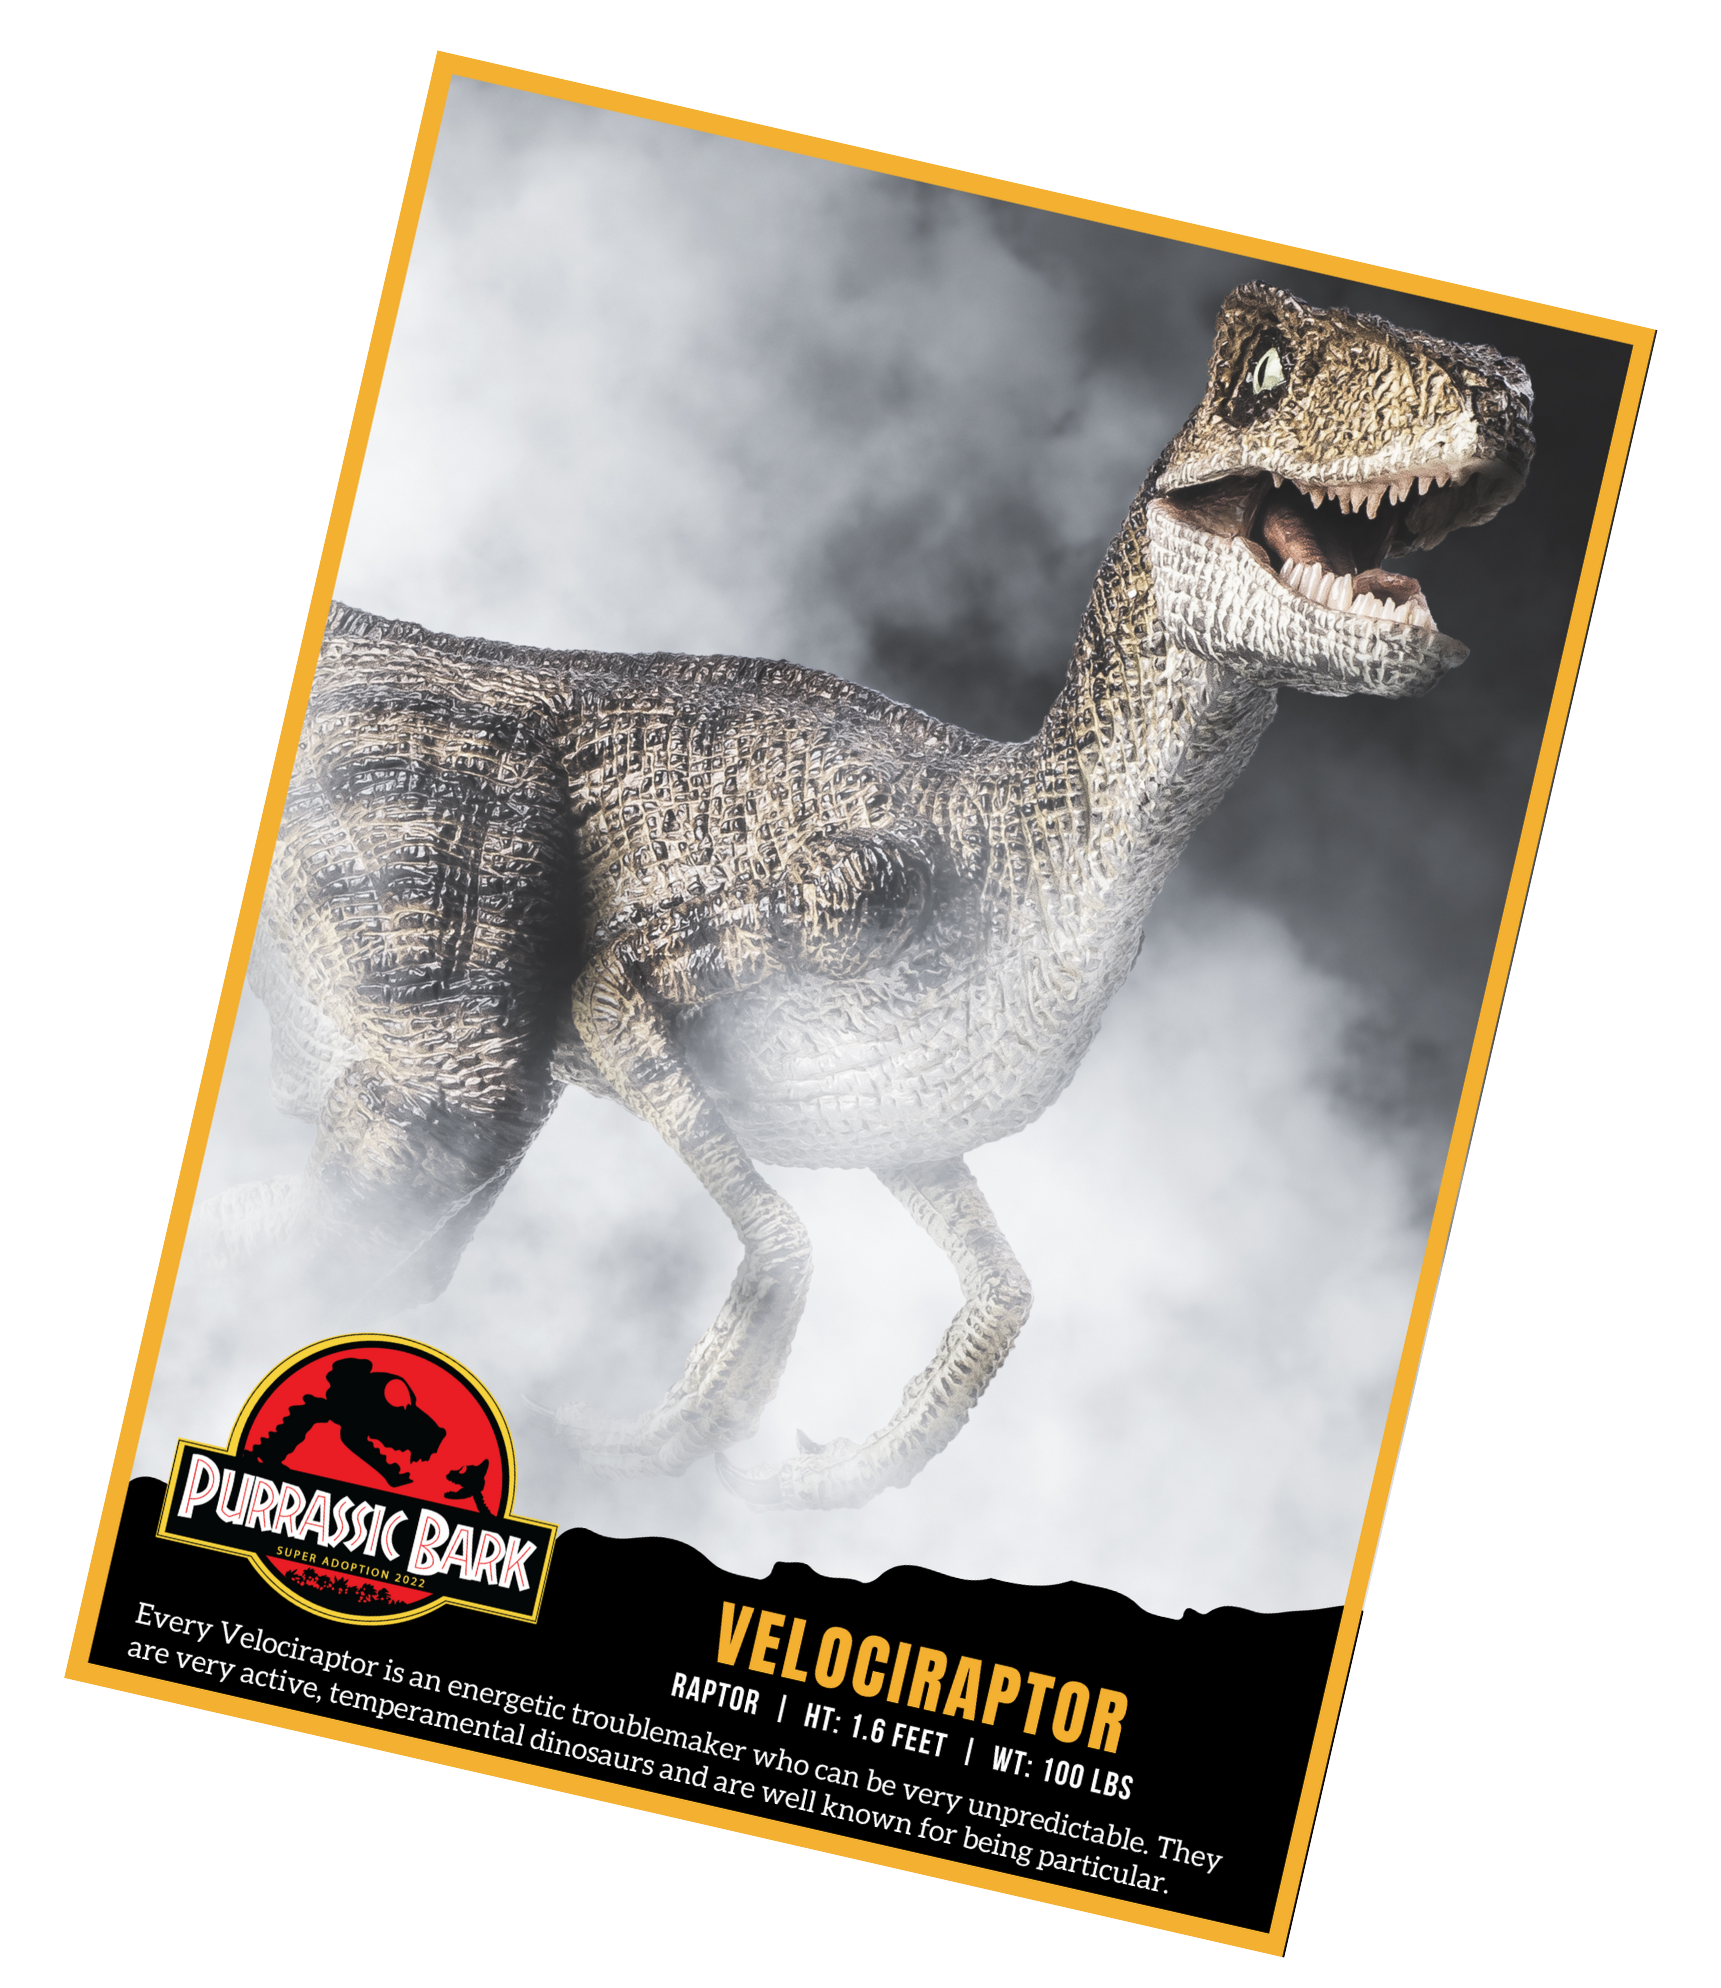 Every Velociraptor is an energetic troublemaker who can be very unpredictable. They are very active, temperamental dinosaurs and are well known for being particular.